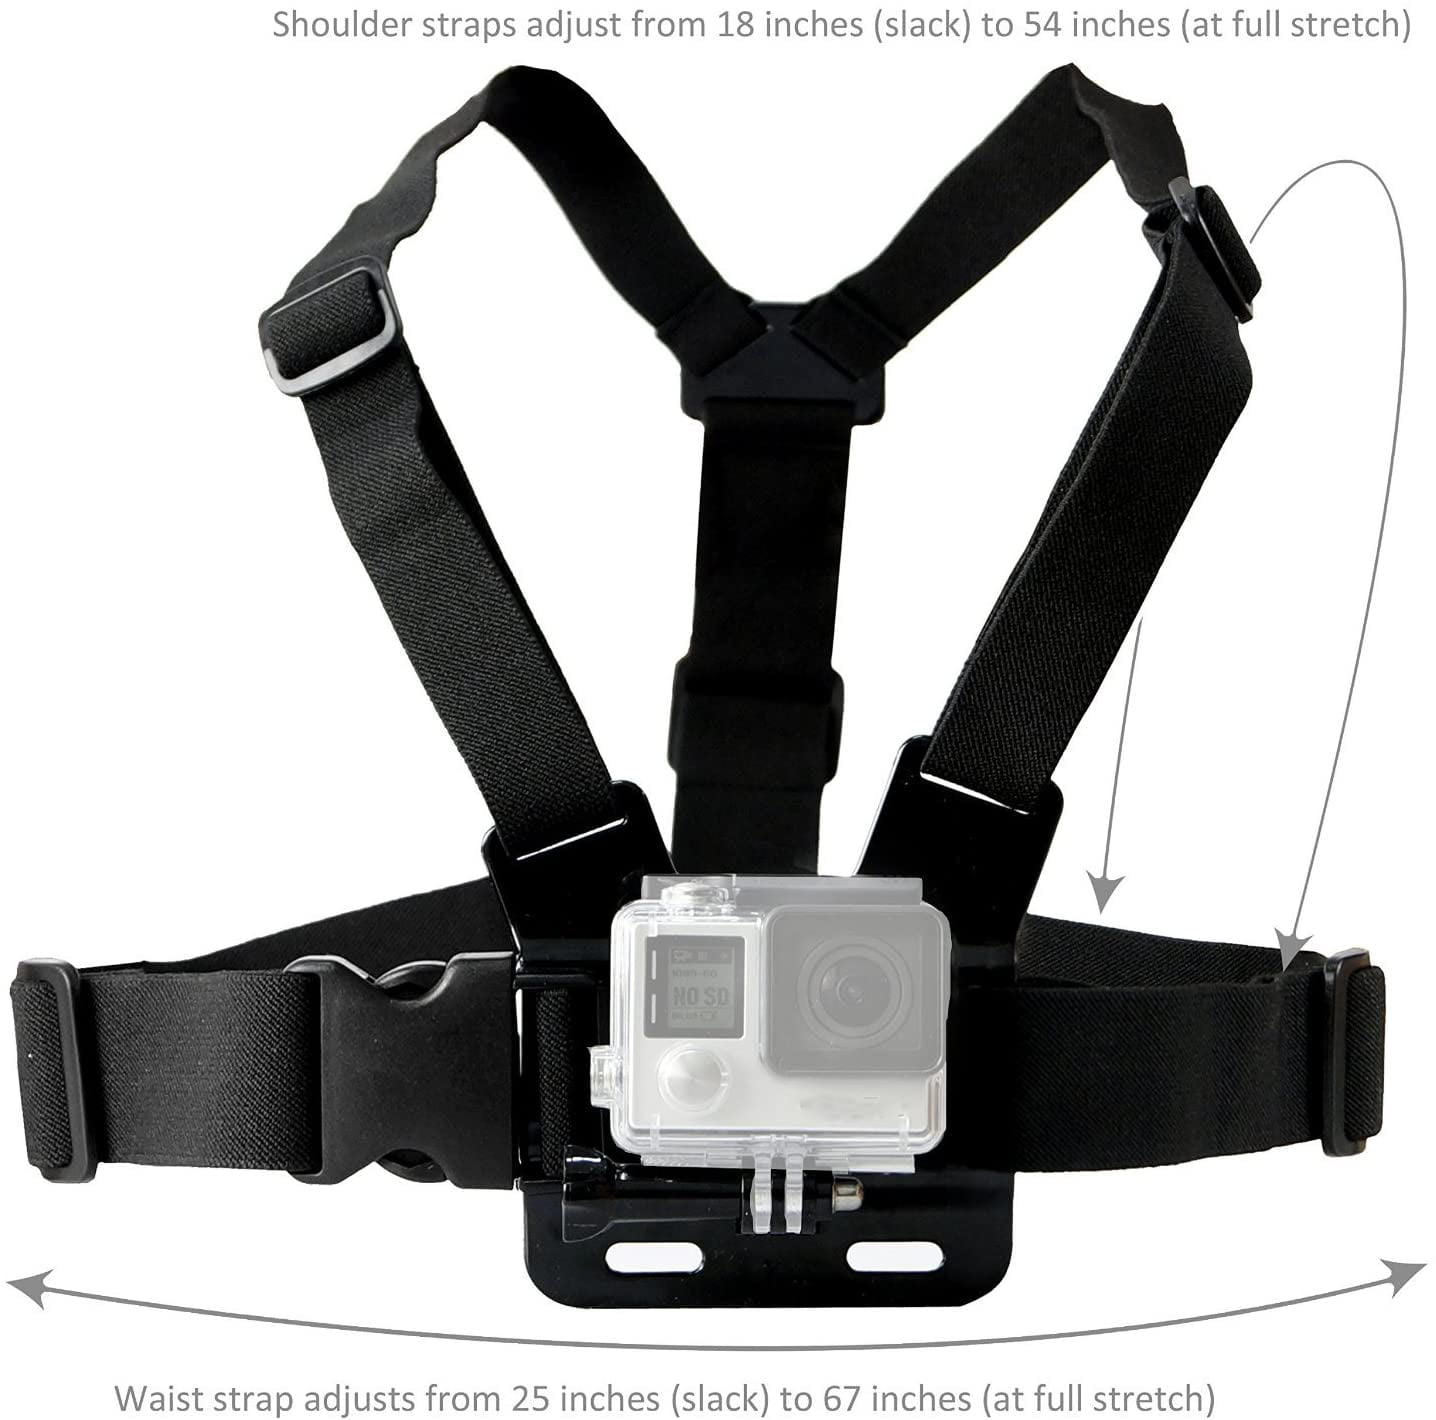 CAMOLA GoPro Chest Mount Harness Action Camera Accessories Compatible with Gopro Hero 10 9 8 7 6/Apexcam/AKASO EK7000/Dragon Touch/Apeman/Crosstour/Lead Edge 4K Action Camera